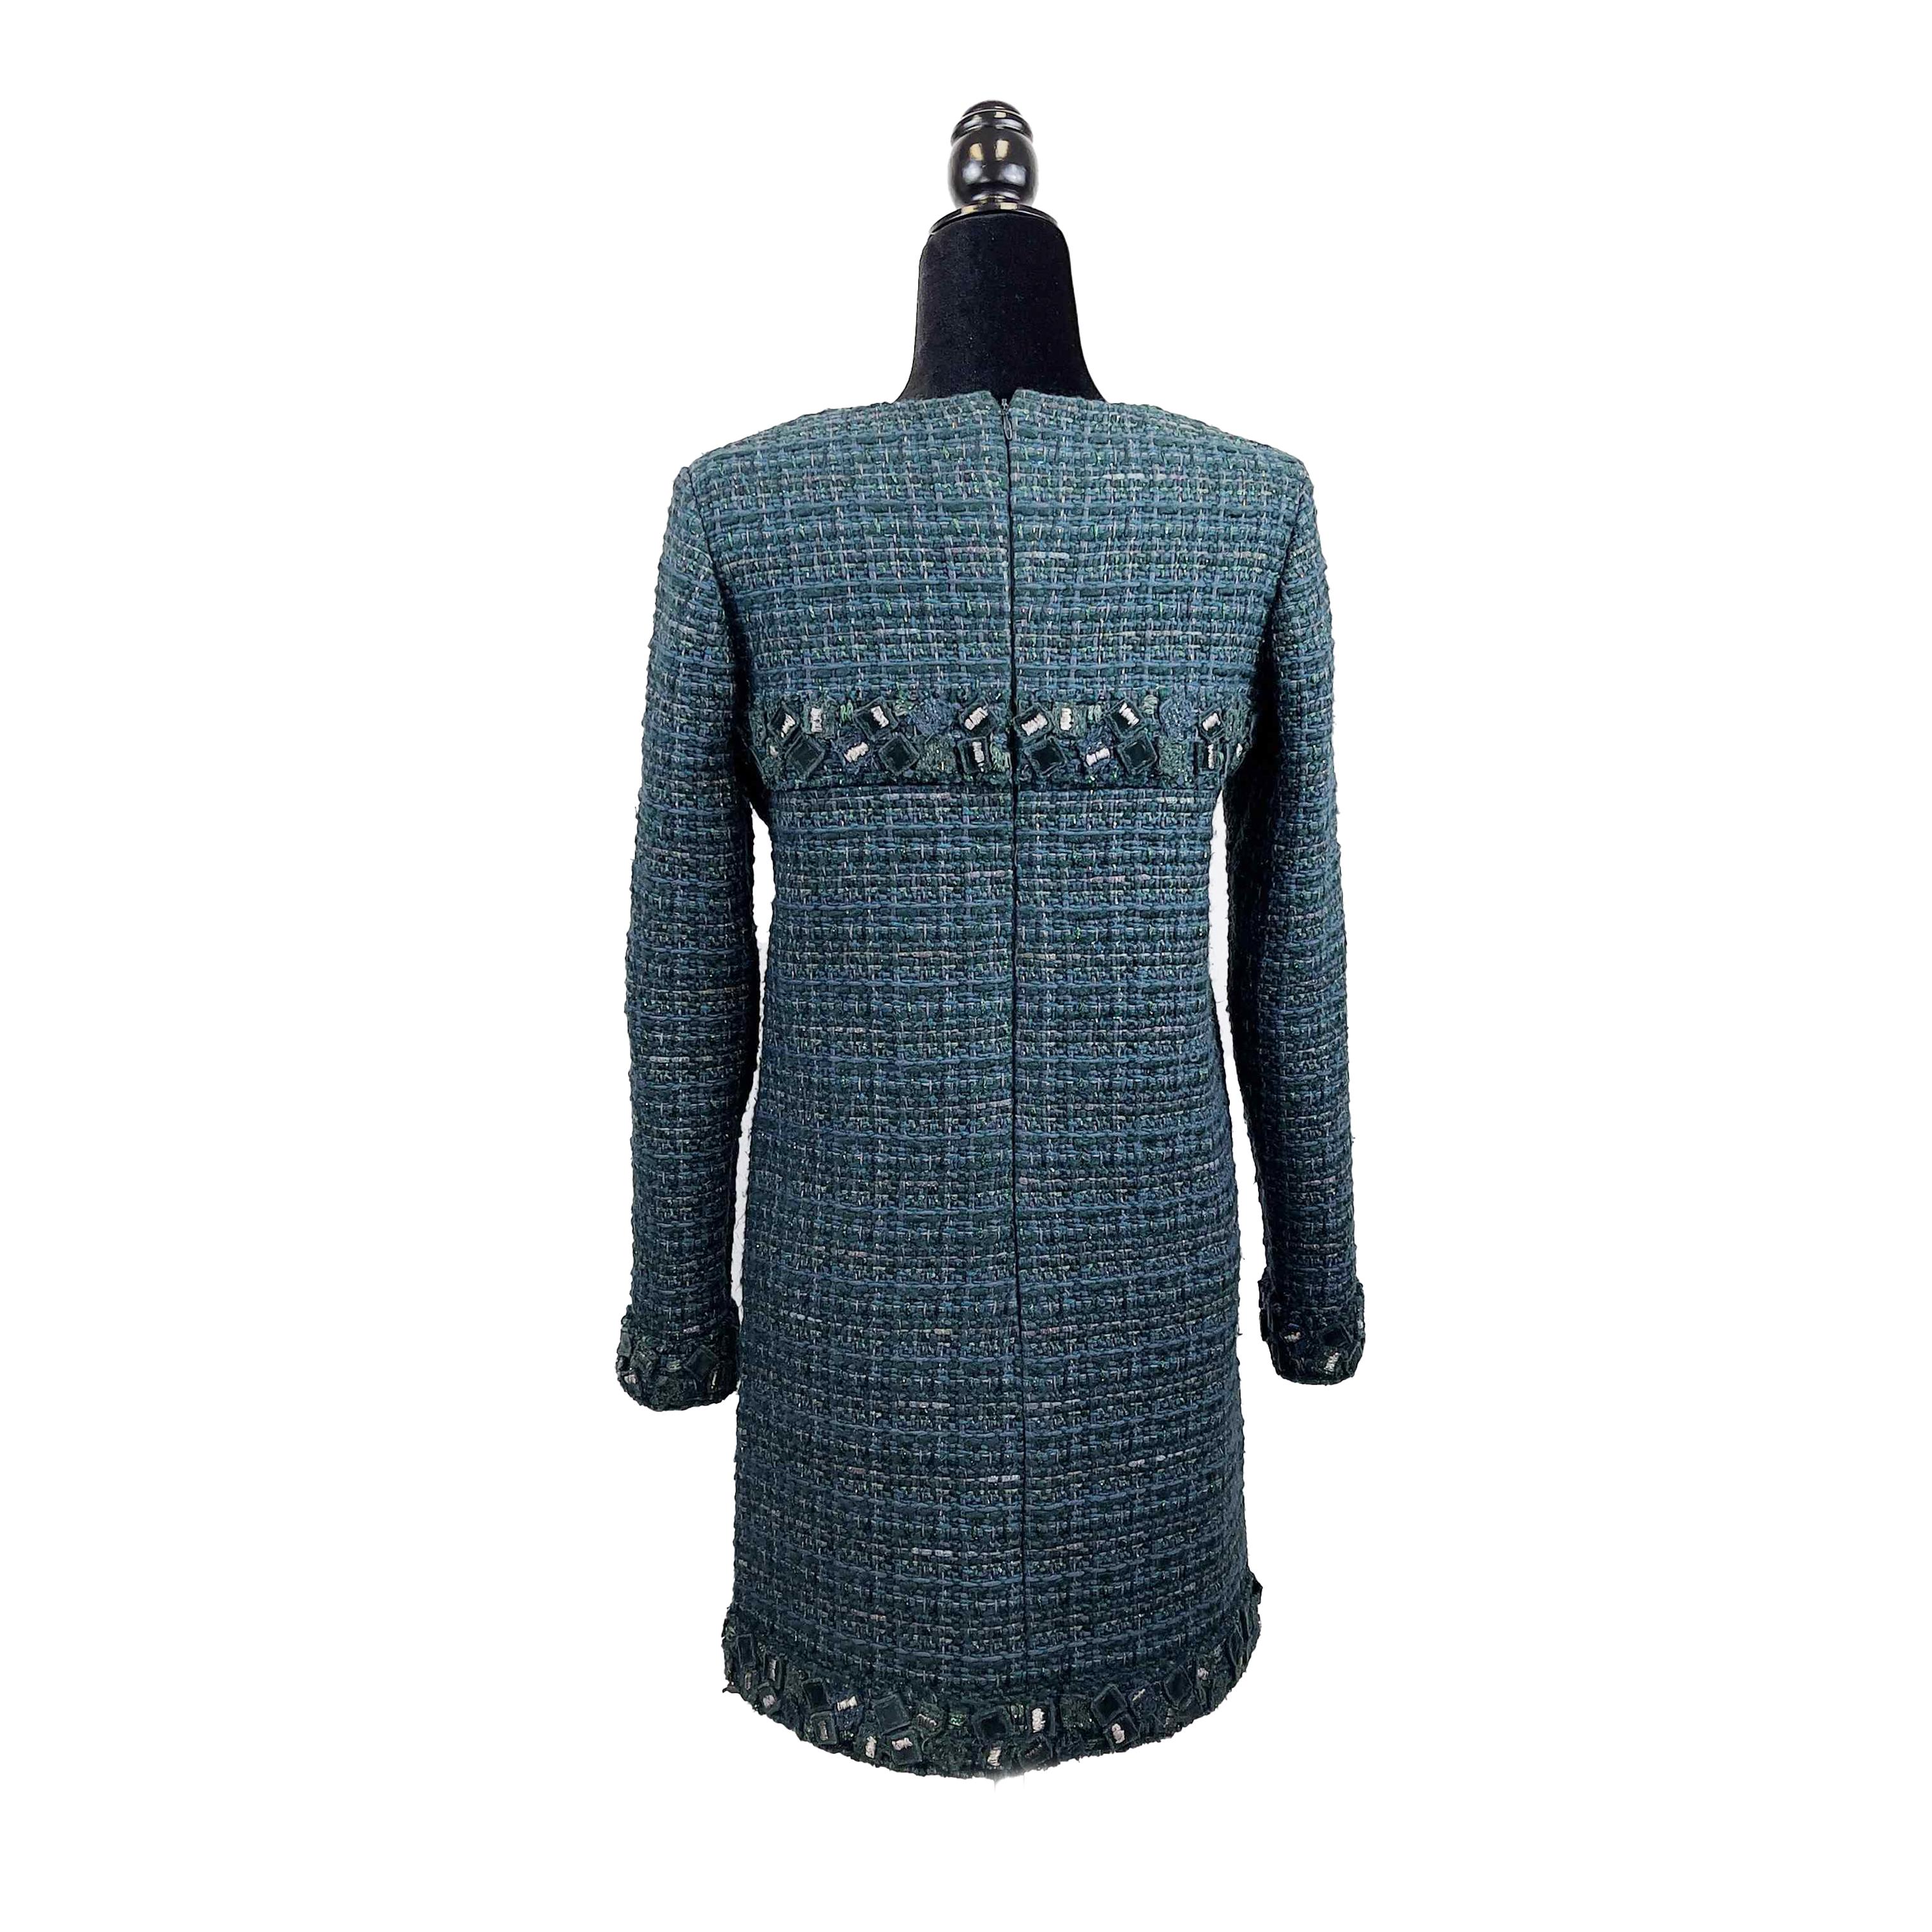 CHANEL - 12A Green Fantasy Lesage Tweed Dress Metallic Thread - FR 42 US 10

Description

From Karl Lagerfield's Chanel's 2012 Autumn Collection
Chanel Lesage  Runway Fantasy Tweed Dress
Concealed zip closure at center back
long sleeves
Sleeve on